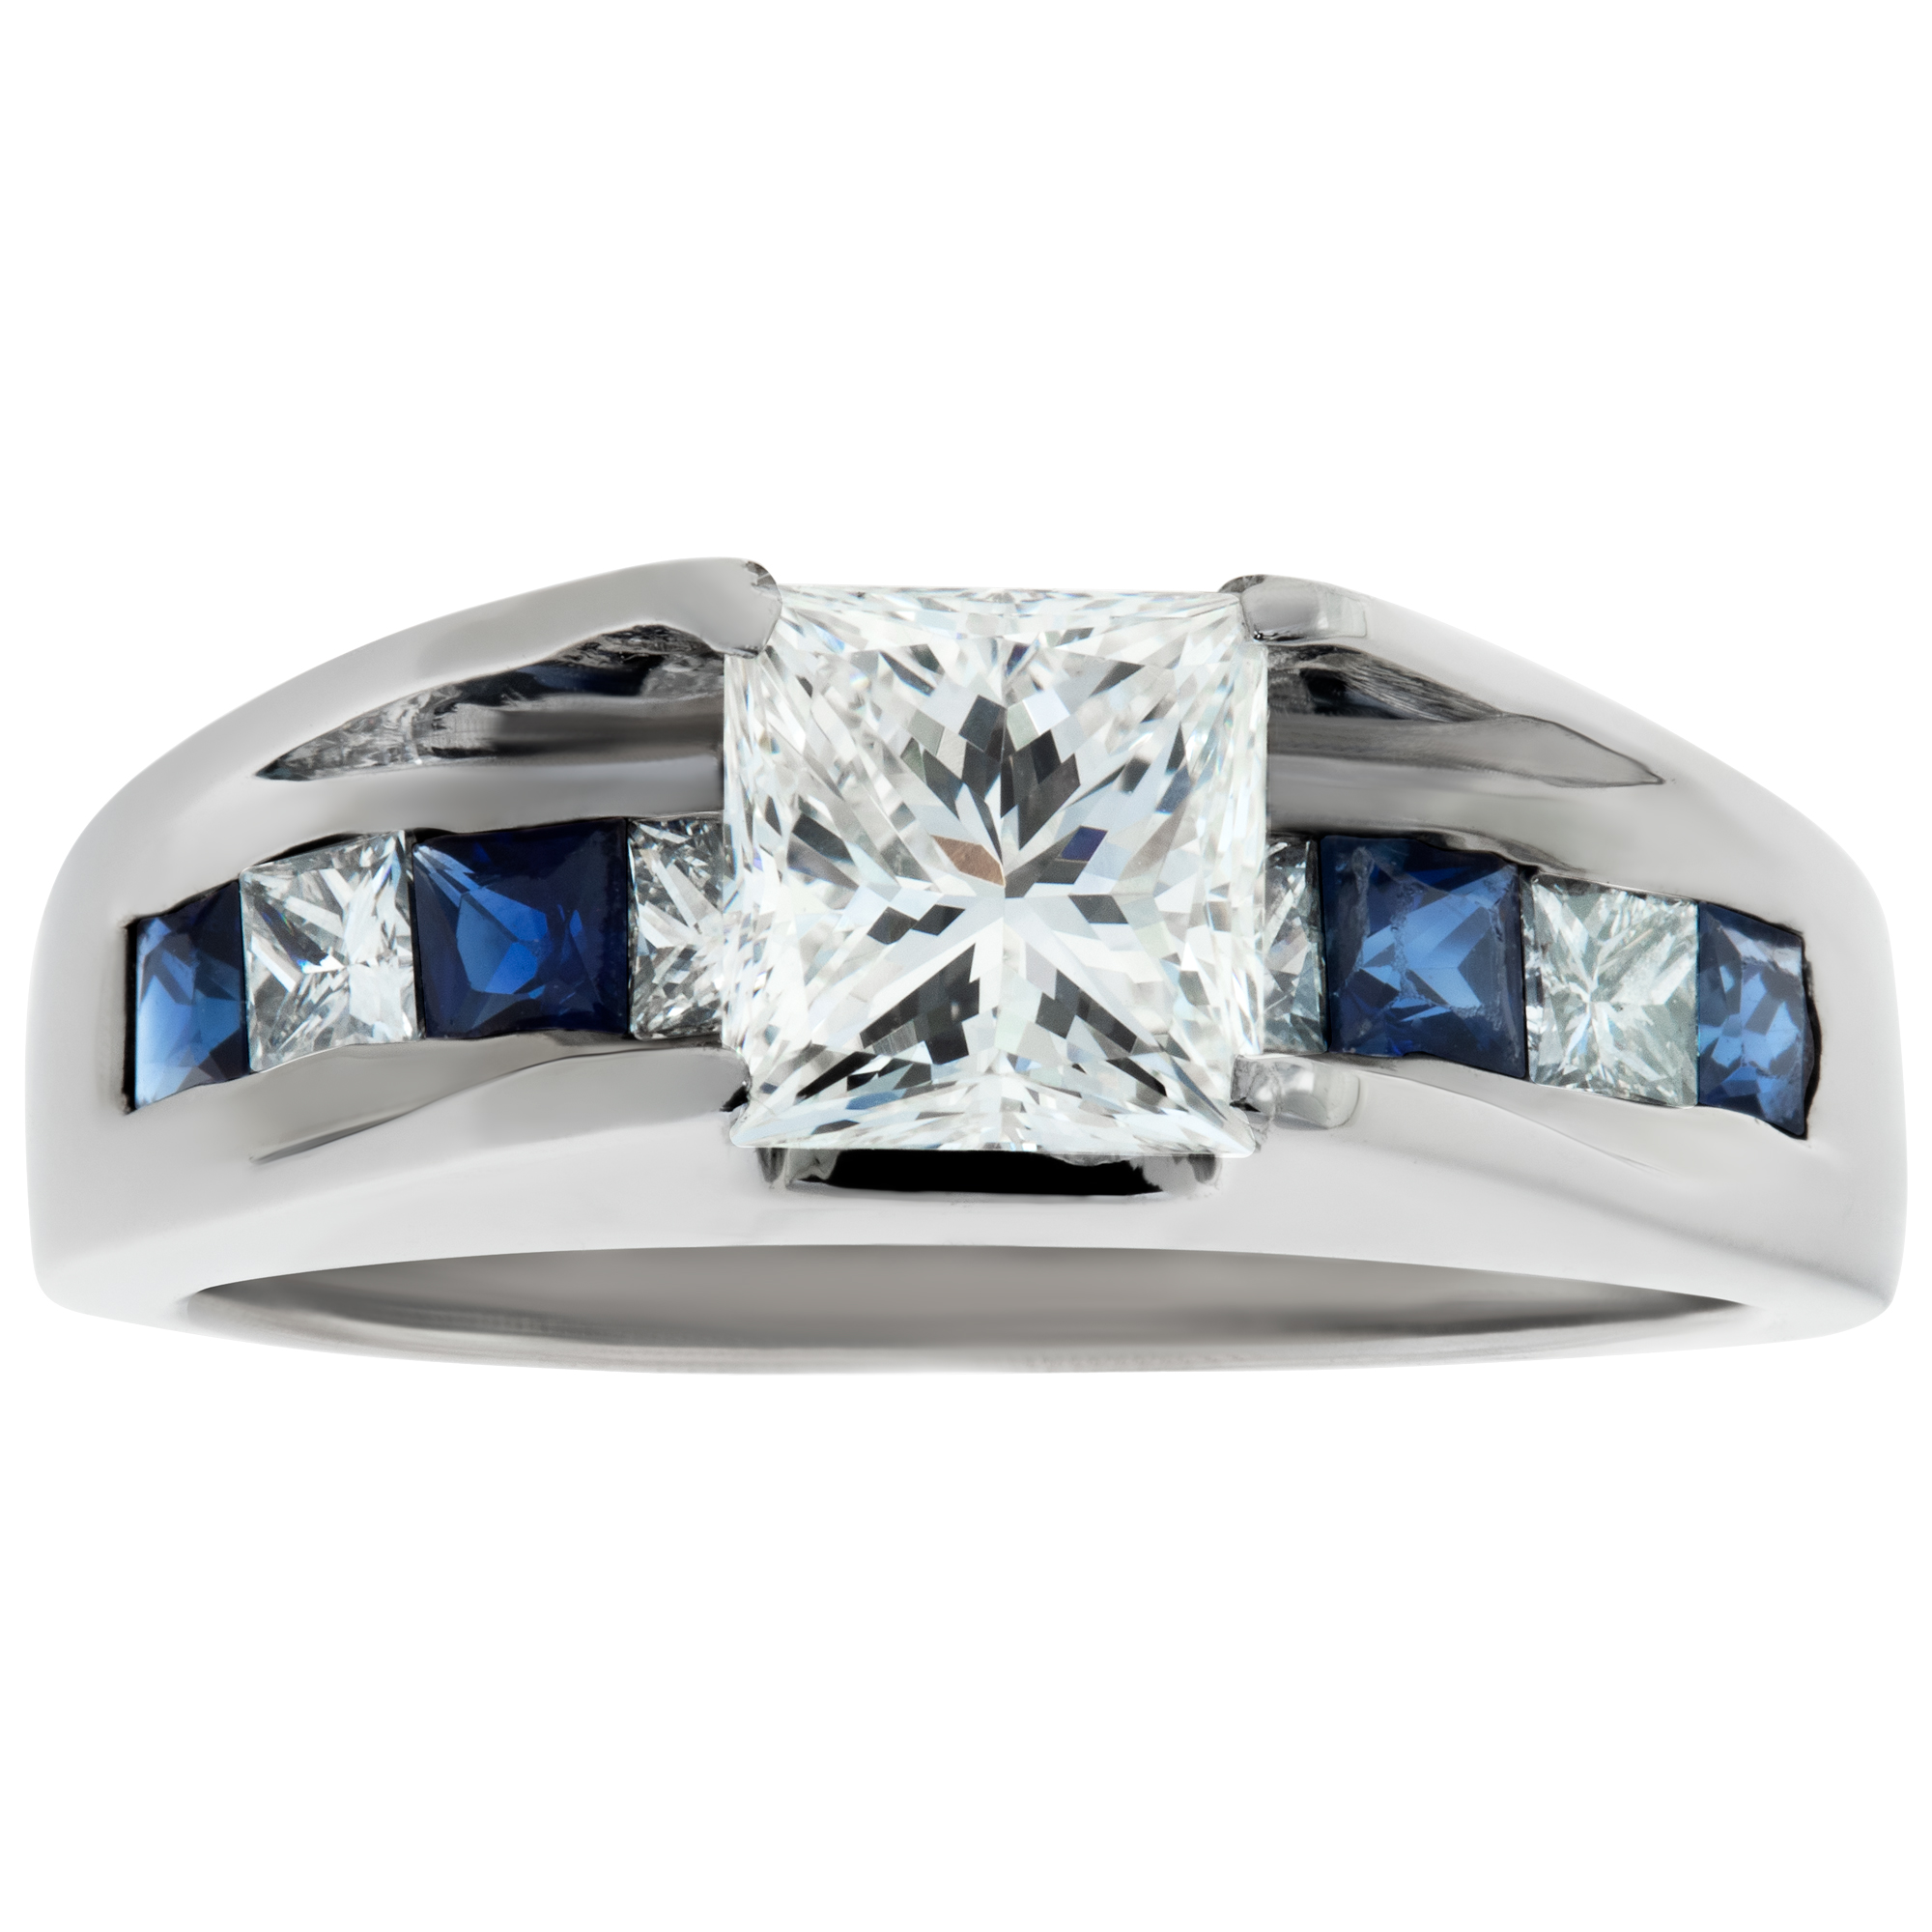 GIA certified princess cut diamond 1.01 cts (H Color, VS2 Clarity) ring set in platinum.